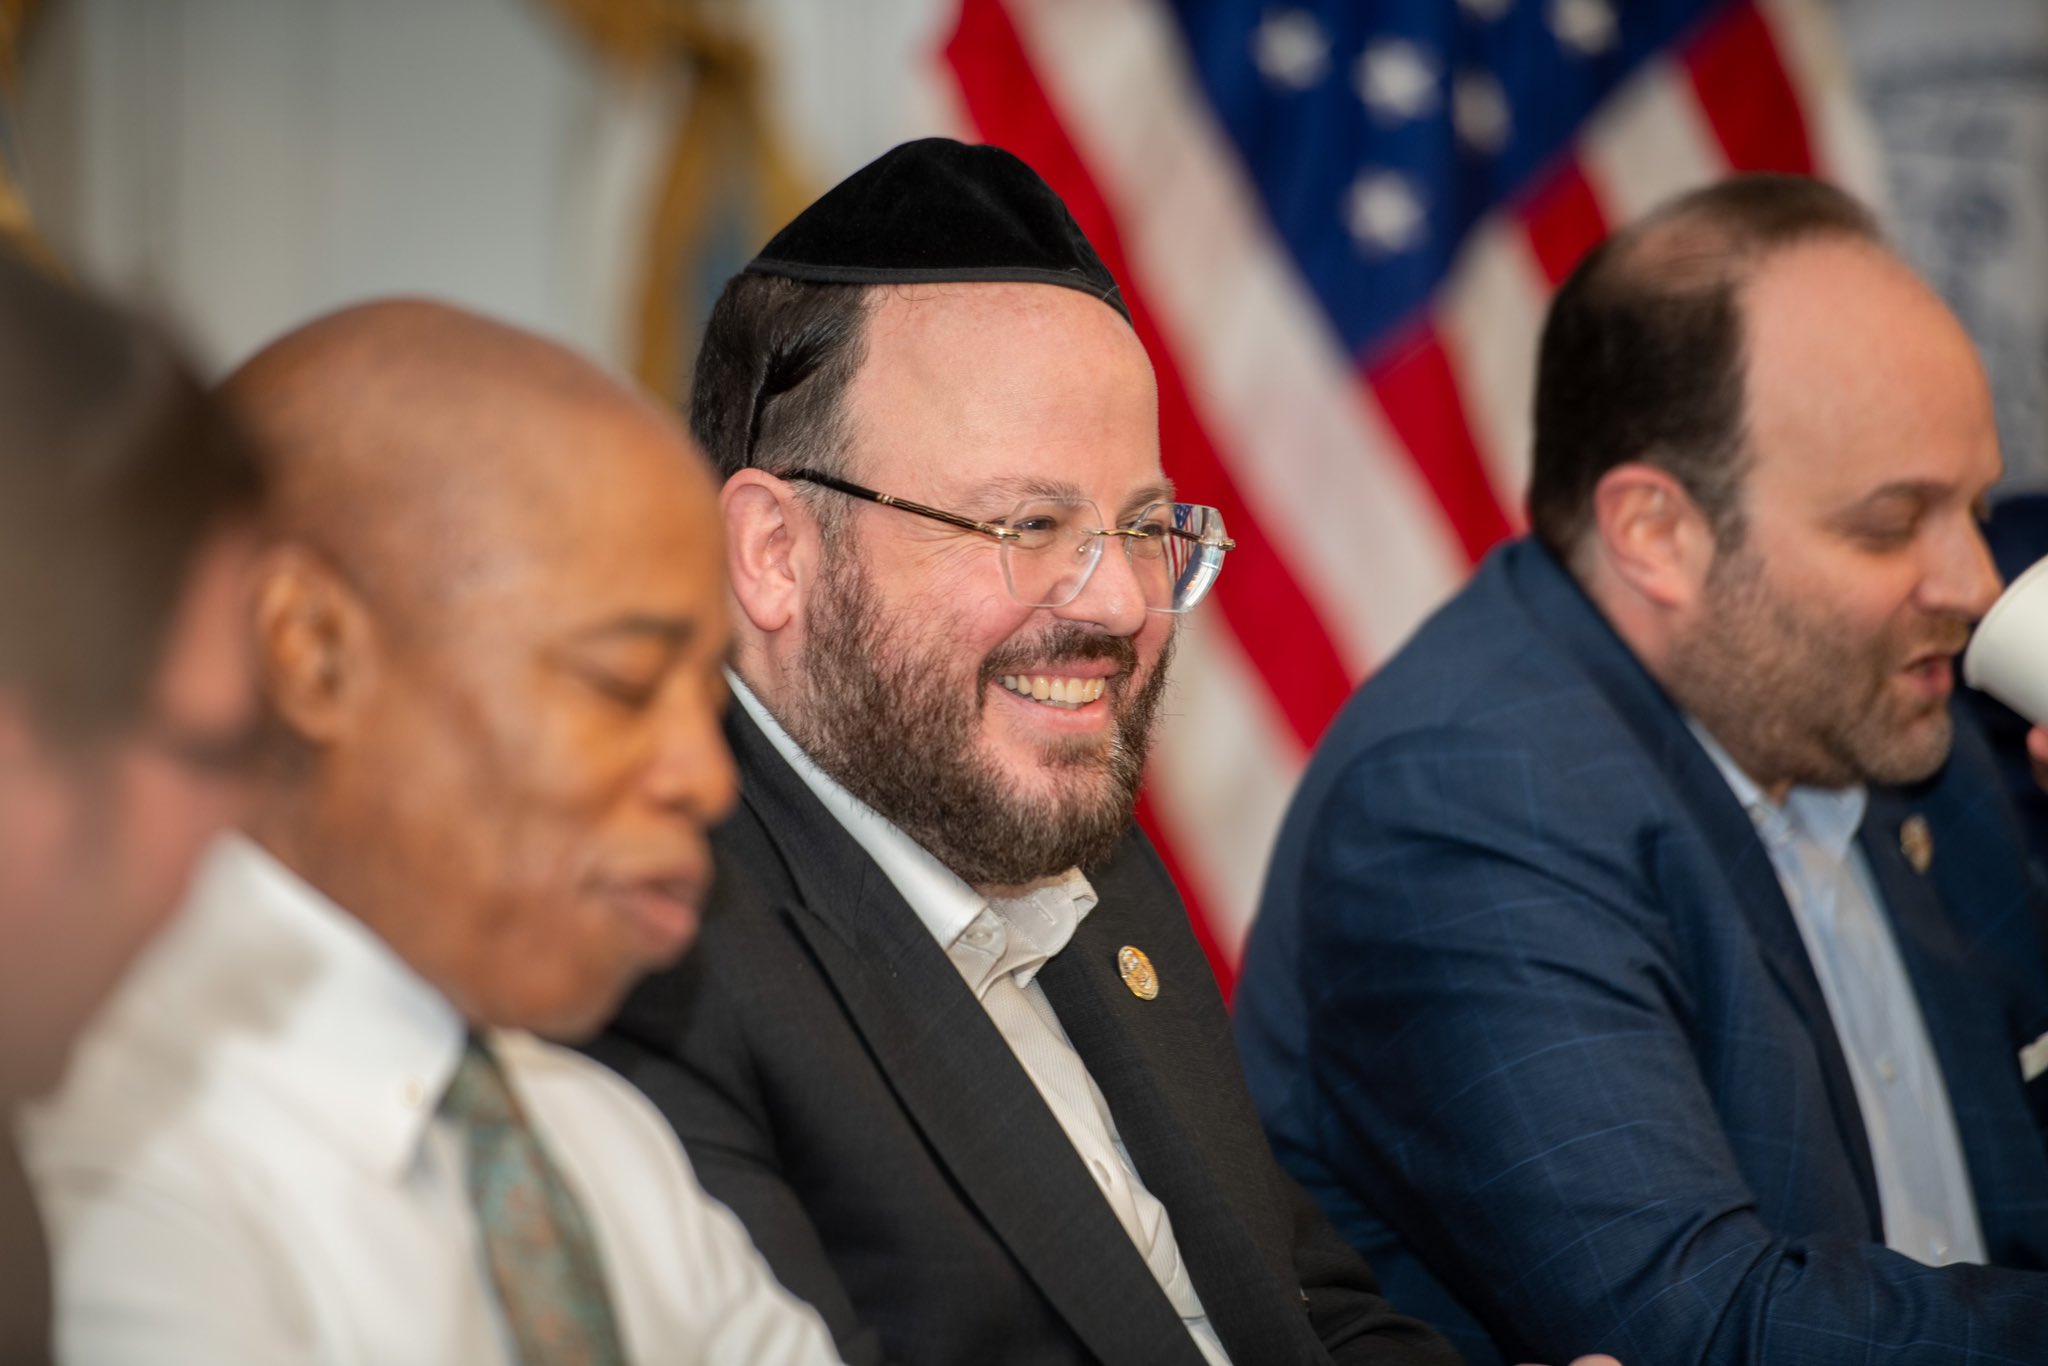 NYC Mayor Eric Adams rejects criticism that his Jewish advisory